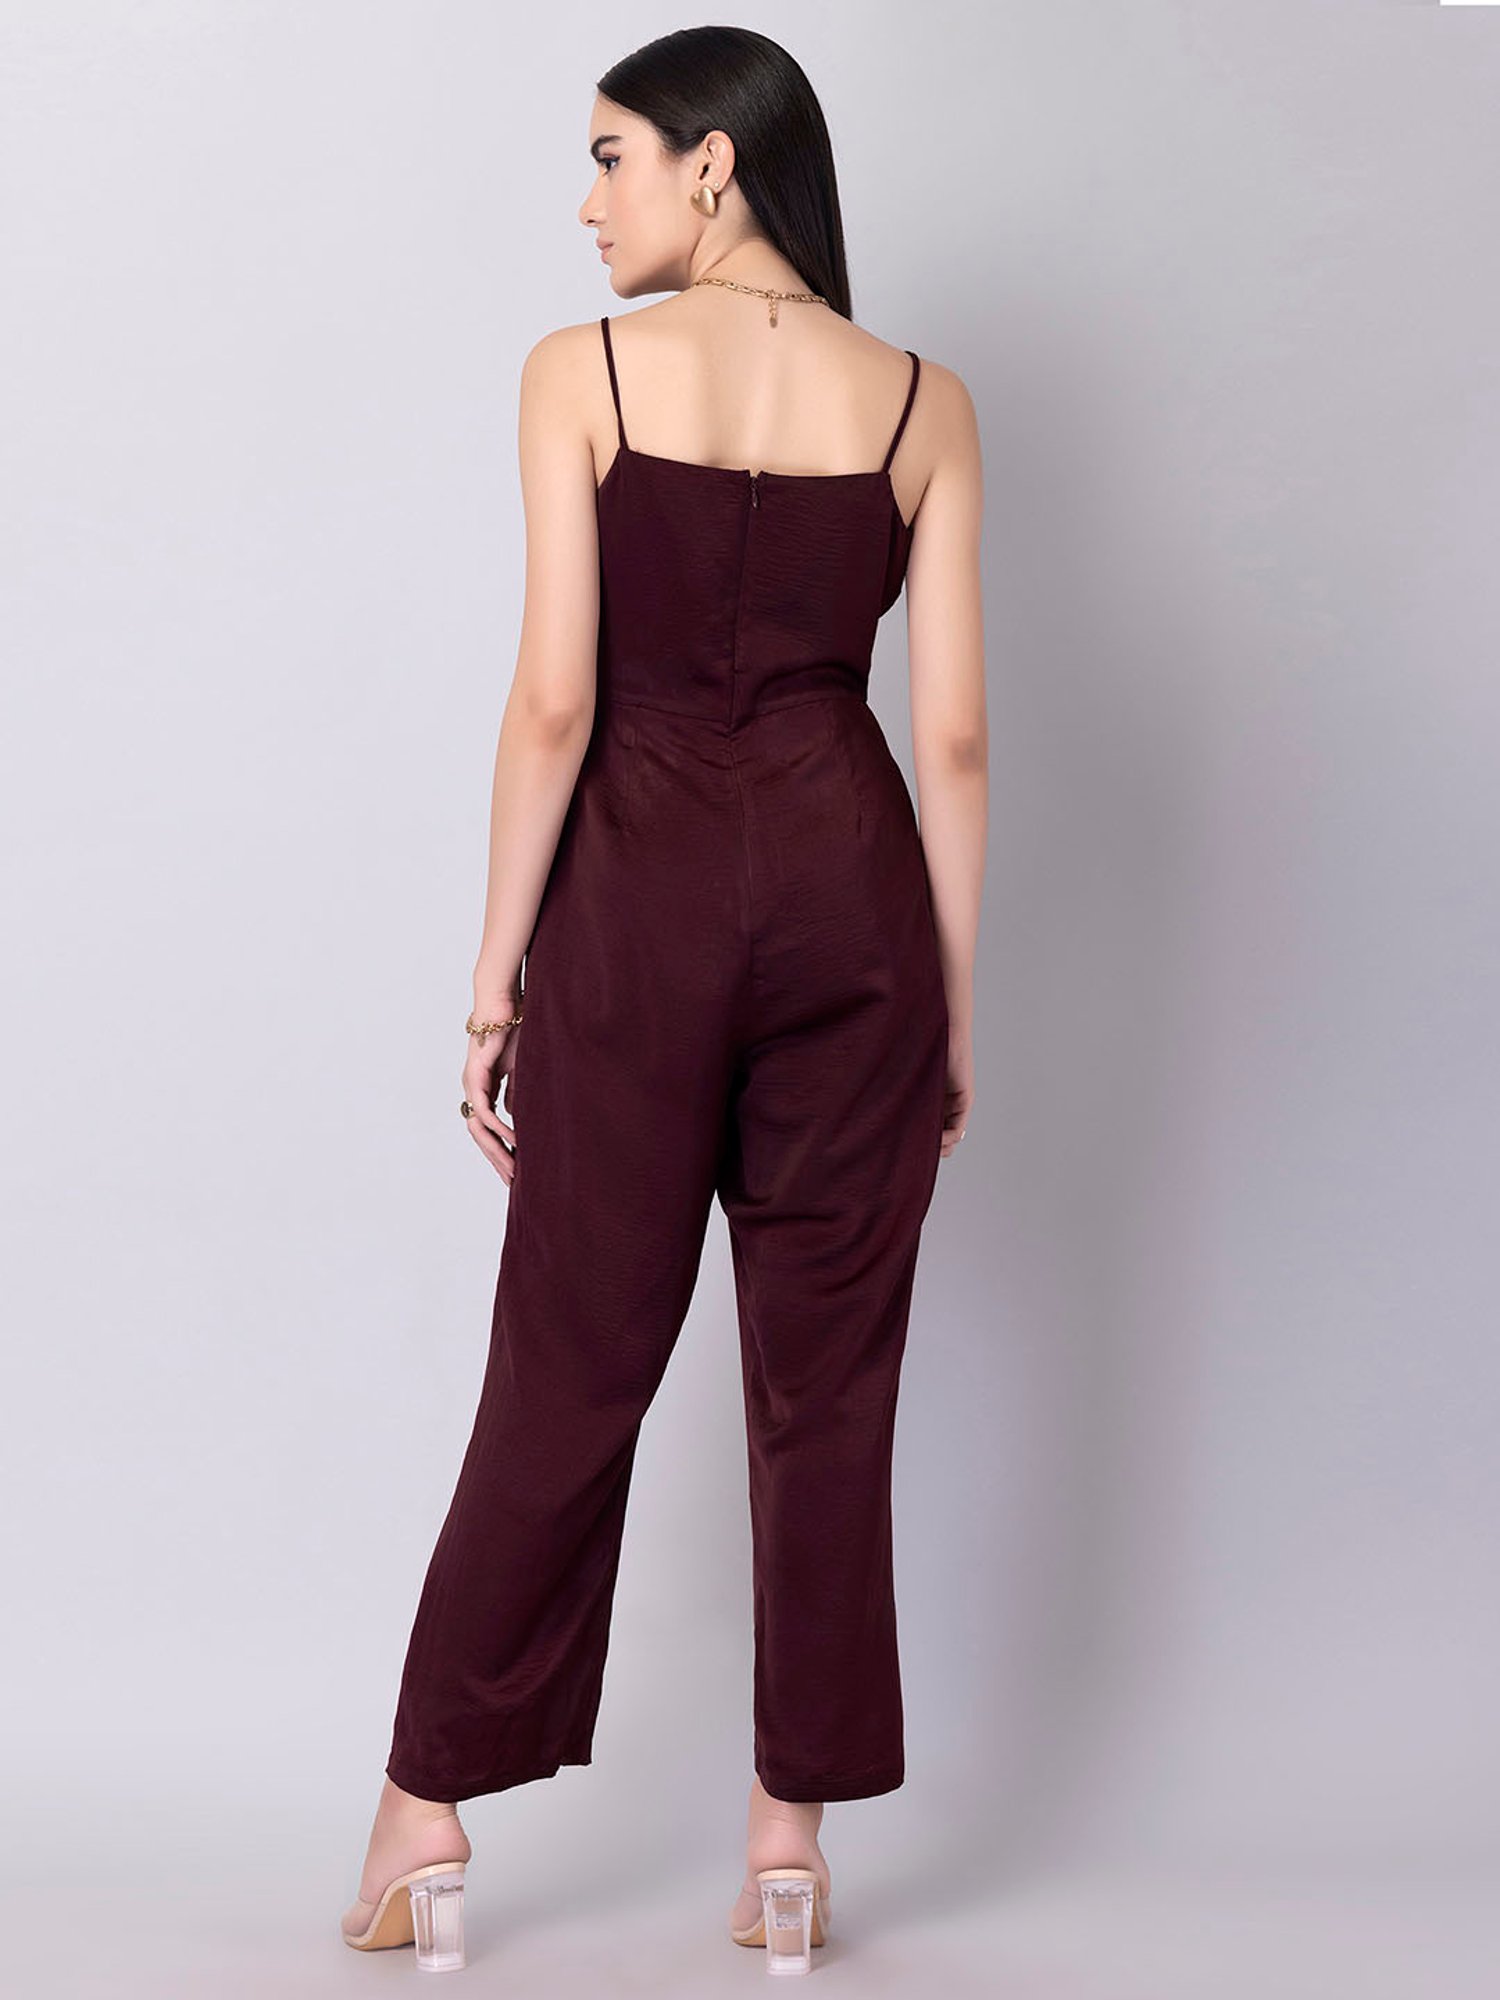 Buy Women Teal Strappy Cold Shoulder Jumpsuit - Jumpsuits Online India -  FabAlley